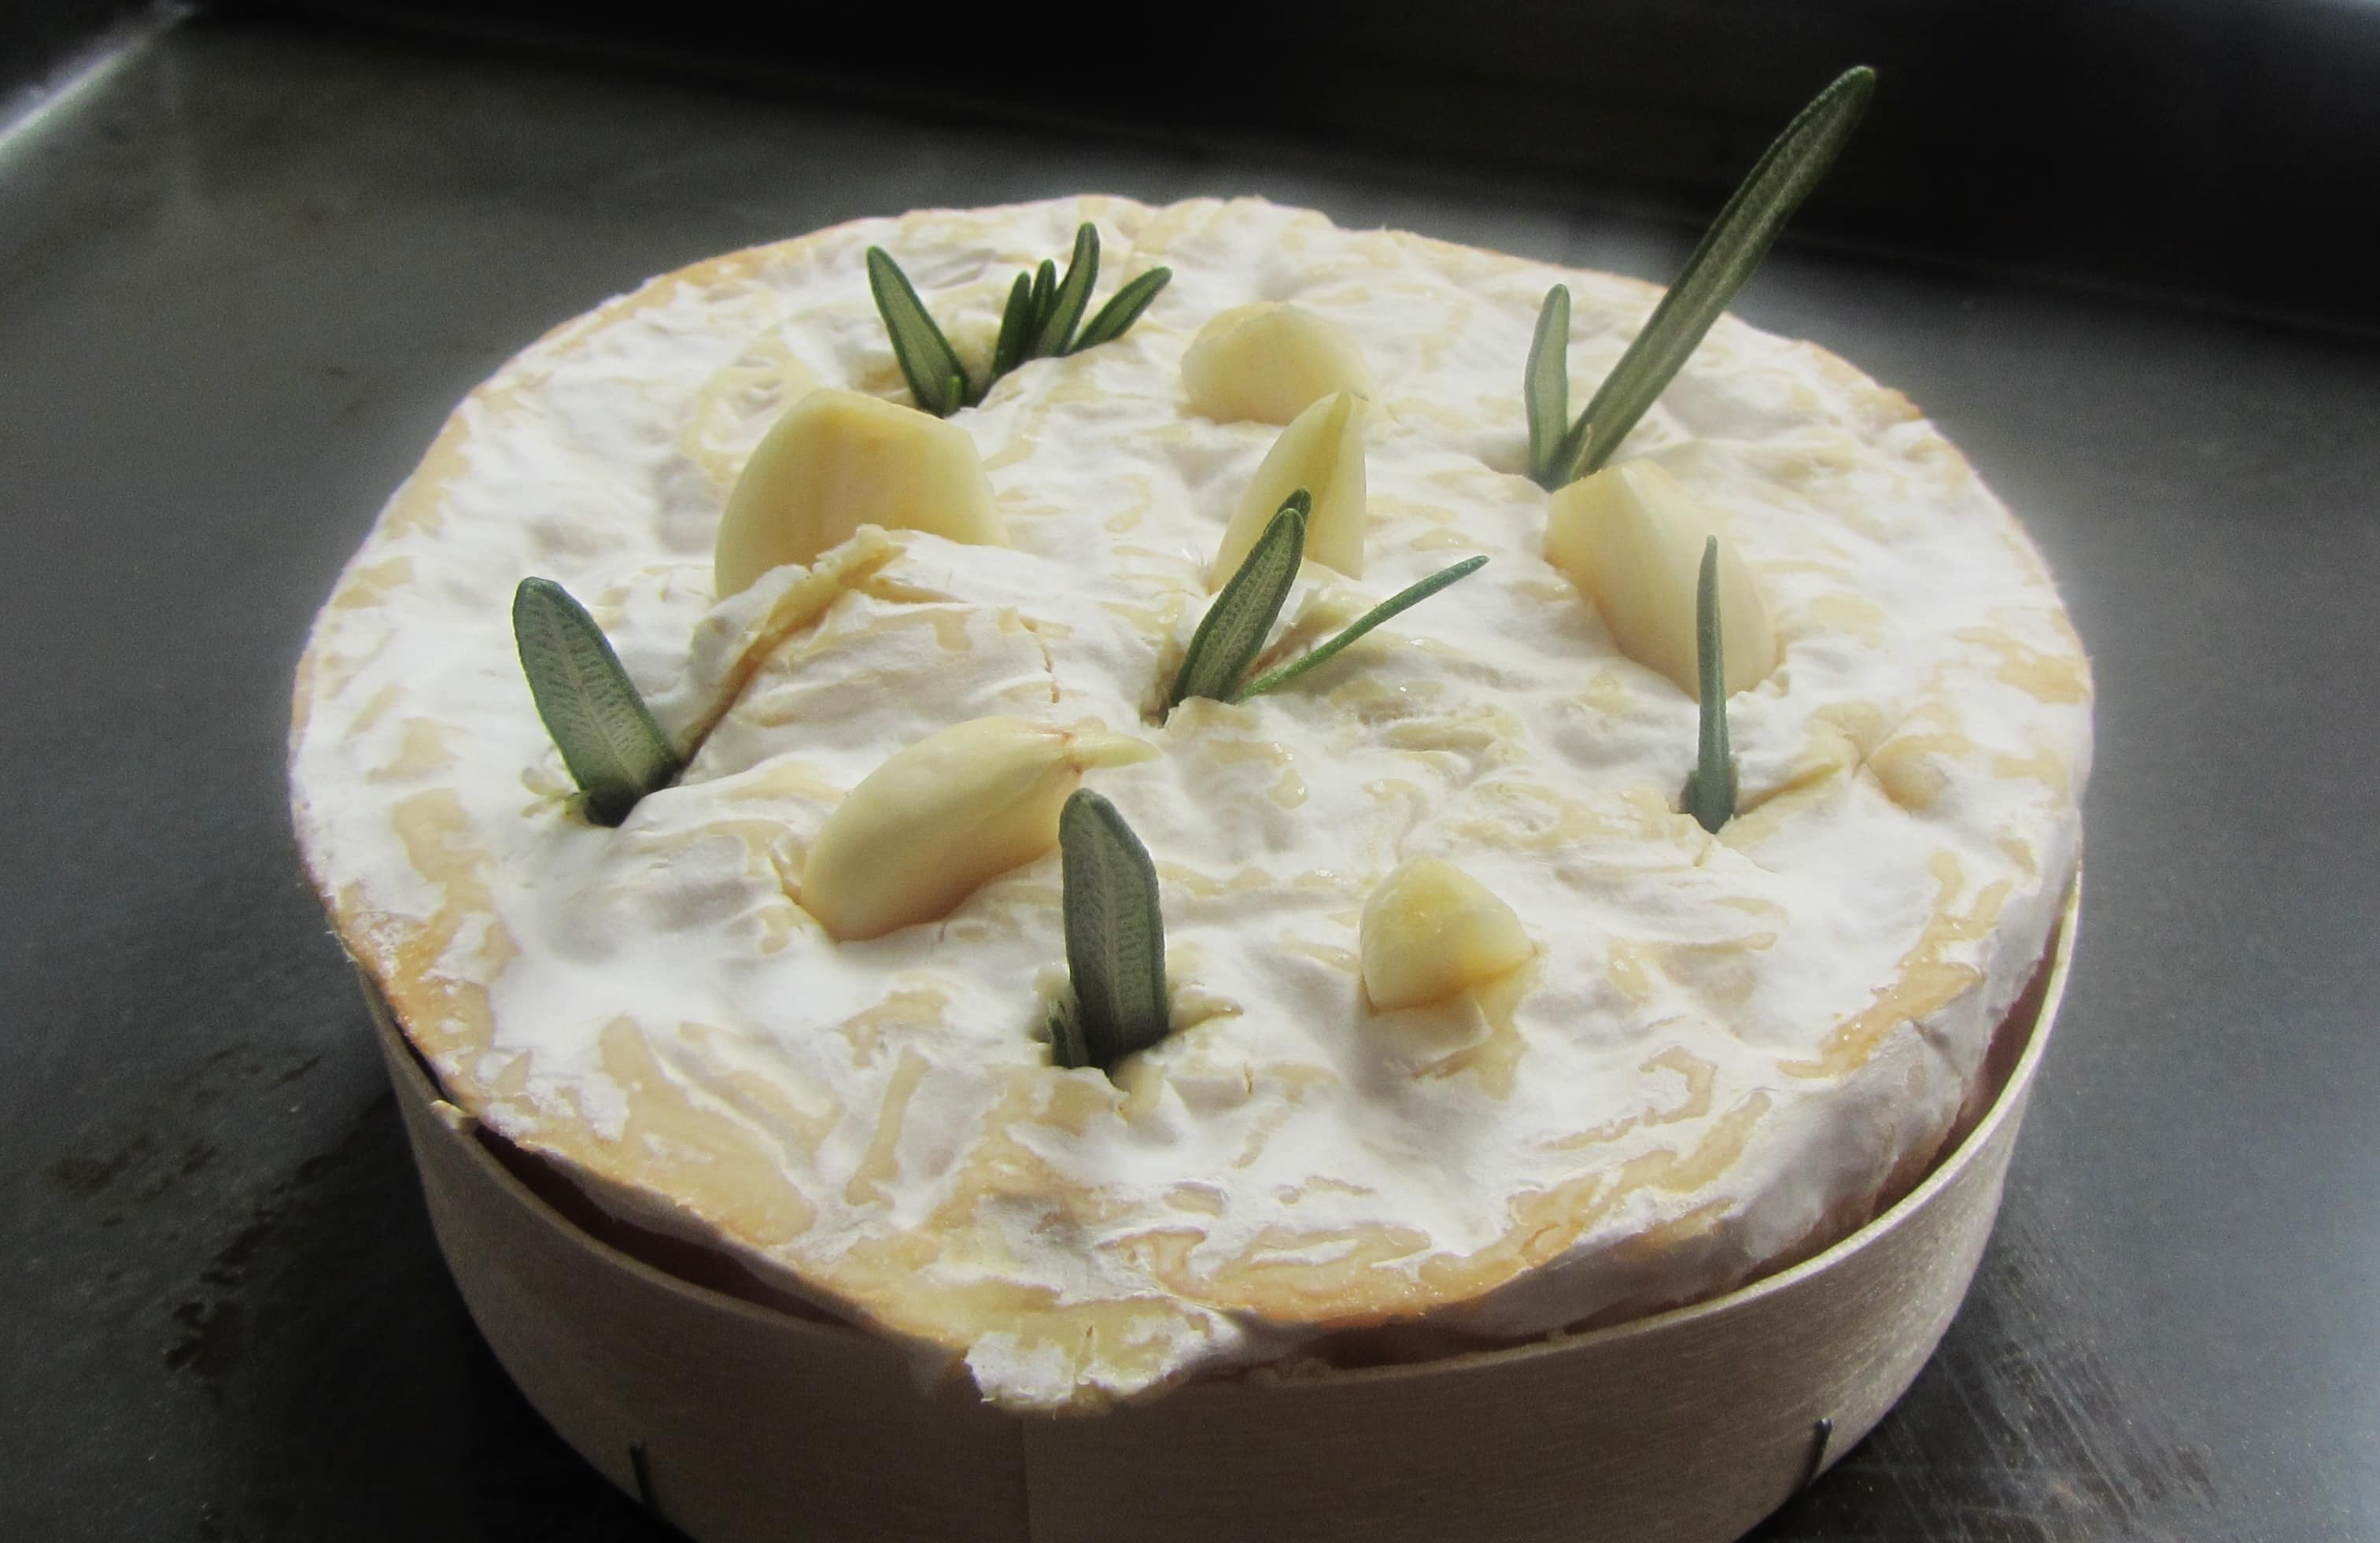 Tunworth cheese studded with garlic and rosemary, ready for baking